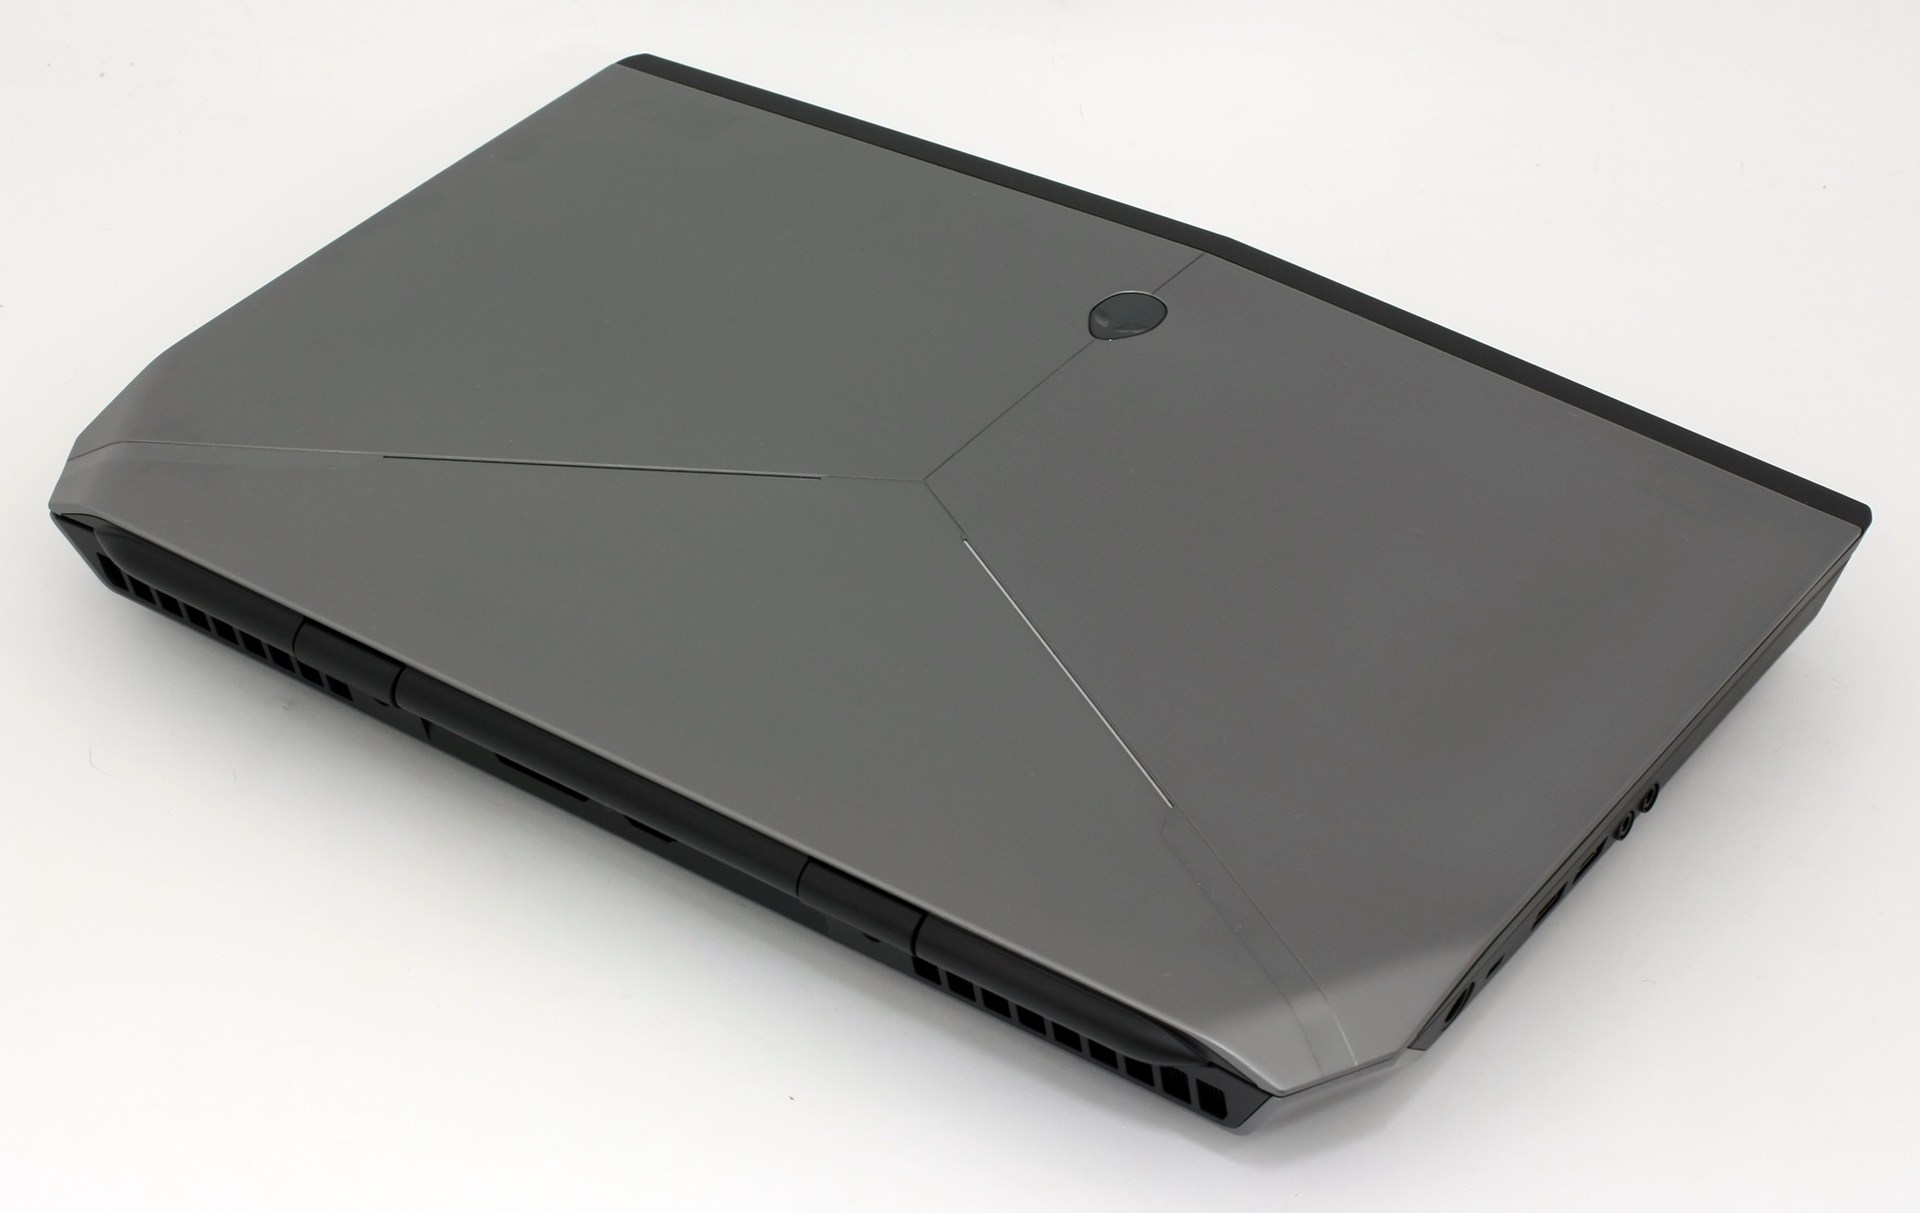 Recertified Dell Alienware 15 R2 15.6-Inch FHD Gaming Laptop ( Intel Core i7-6700HQ 2.6Ghz, 16GB RAM, 500GB HD, NVIDIA GeForce GTX 970M 3GB, Windows 10 Home ) Grade A - image 5 of 8